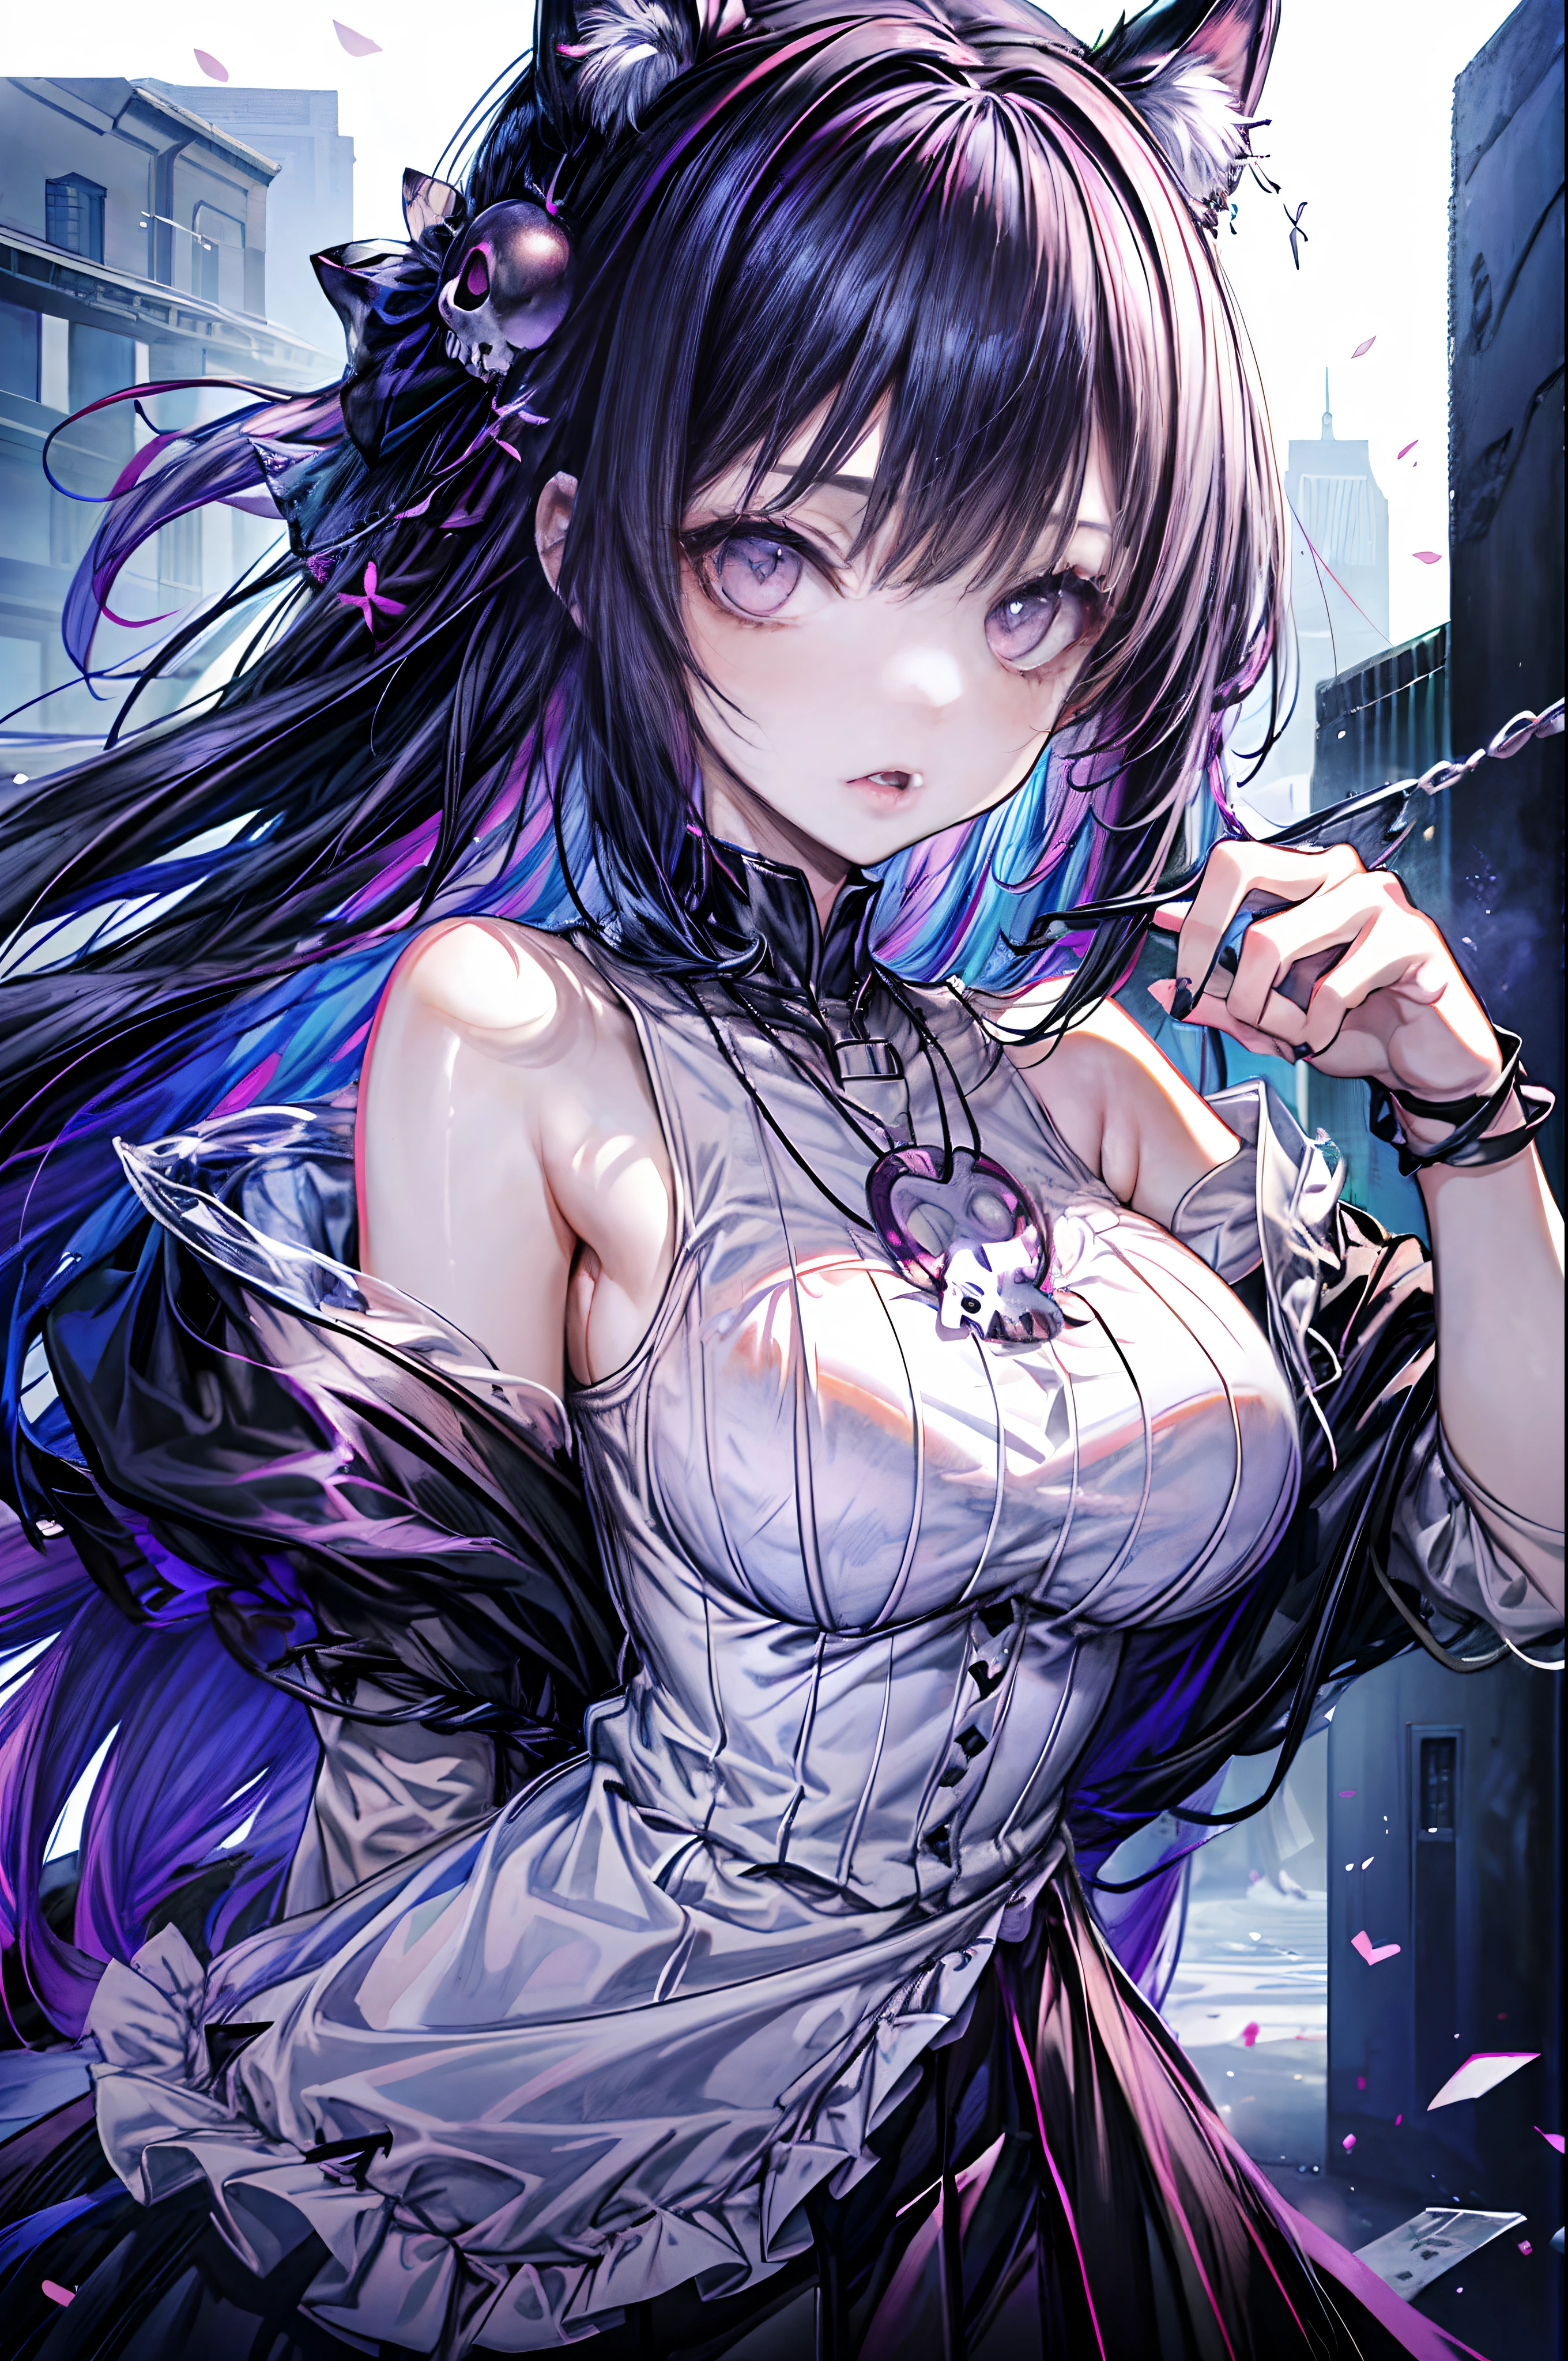 anime girl with horns and a skull necklace, a character portrait by Jin Homura, trending on pixiv, gothic art, 1 7 - year - old anime goth girl, portrait of a goth catgirl, goth girl, anime style illustration, anime girl with cat ears, neo goth, cat girl, anime style portrait, demon anime girl